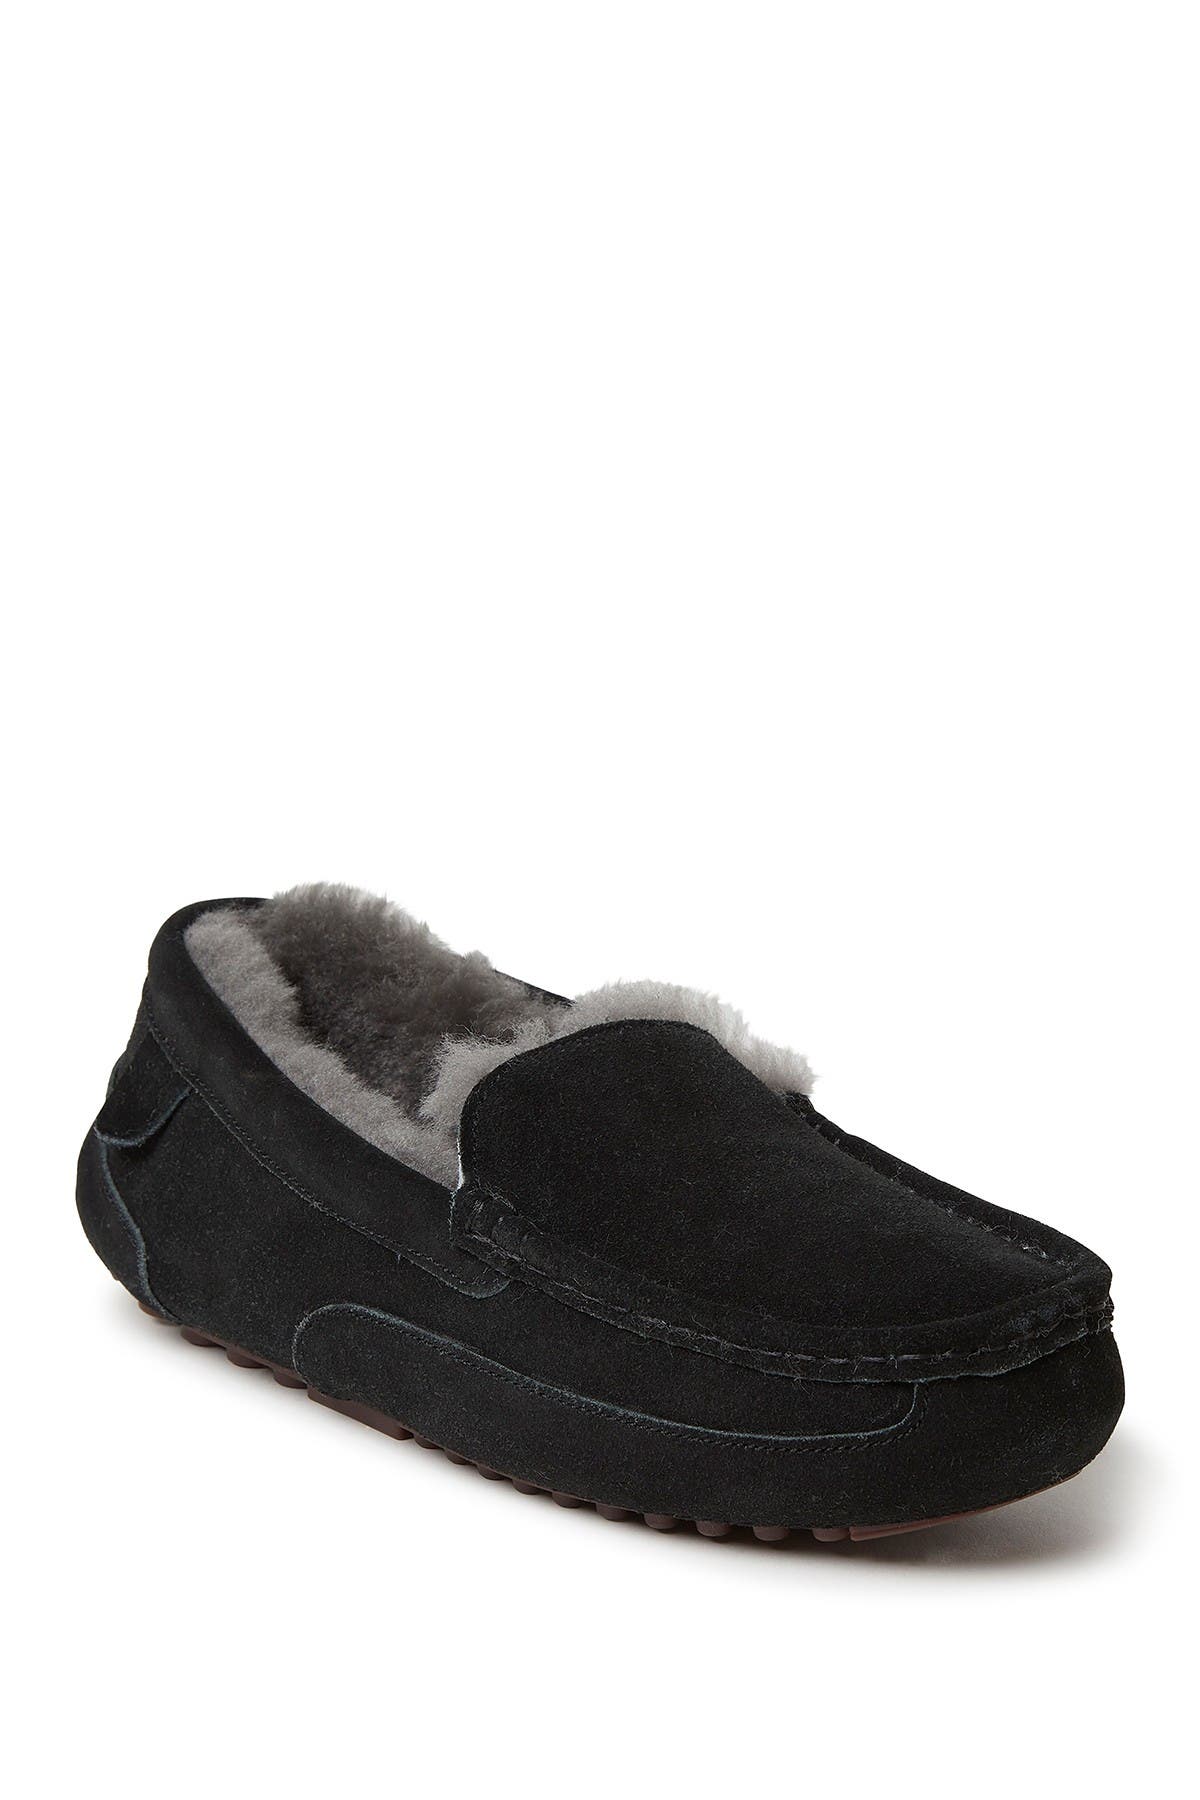 sherpa lined moccasin slippers